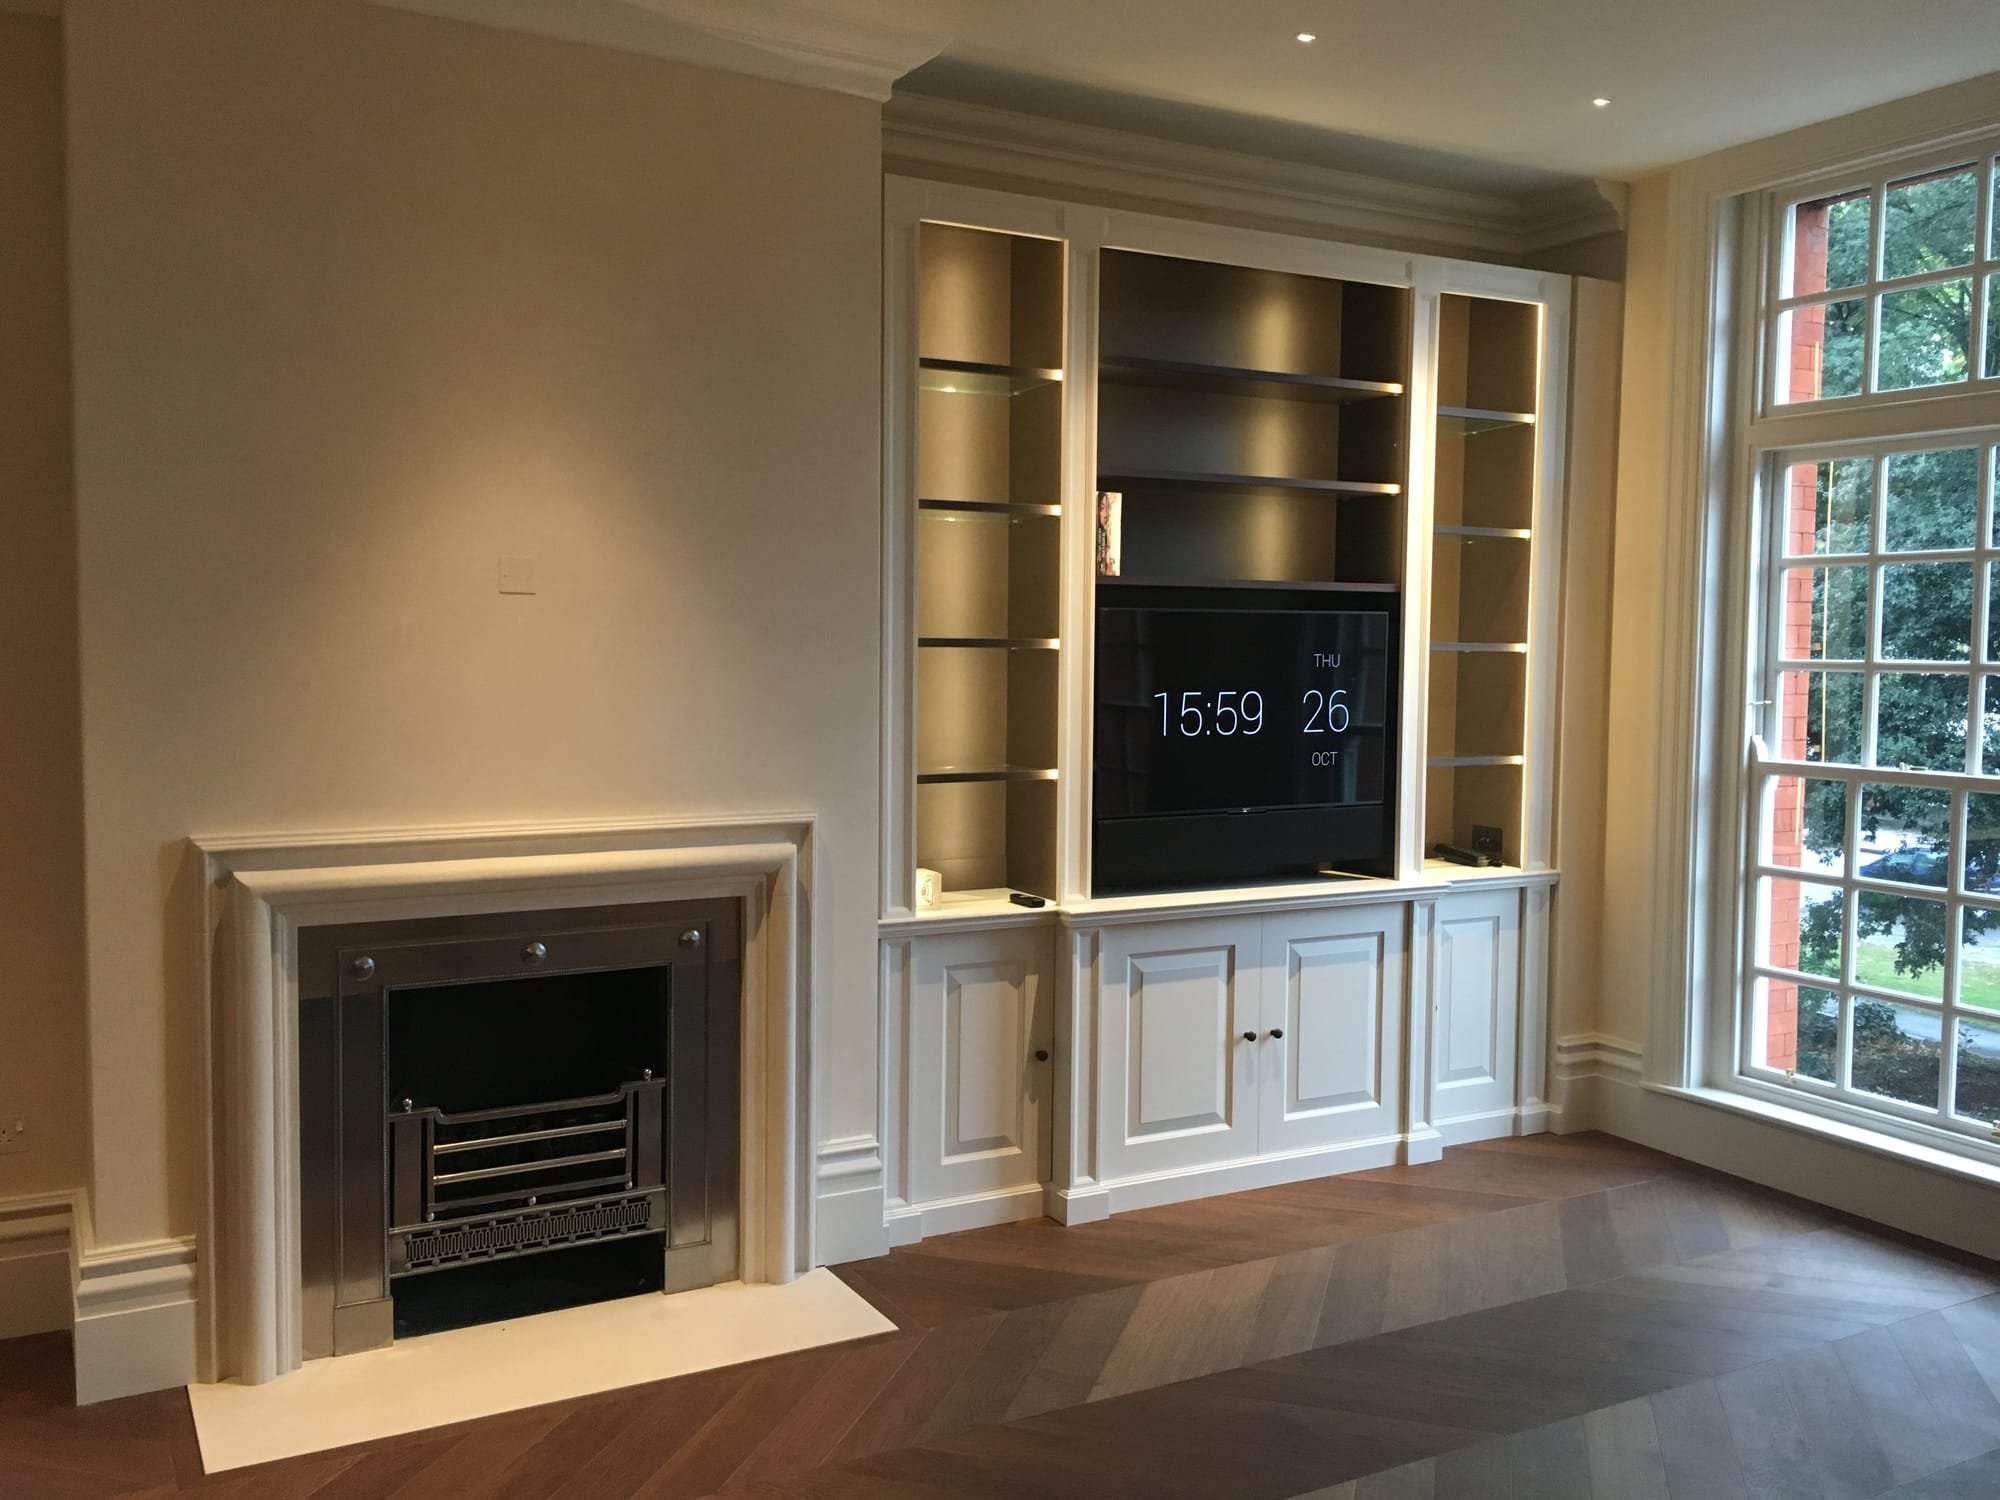 Bespoke joinery / media wall and new fireplace as part of SW3 flat refurbishment